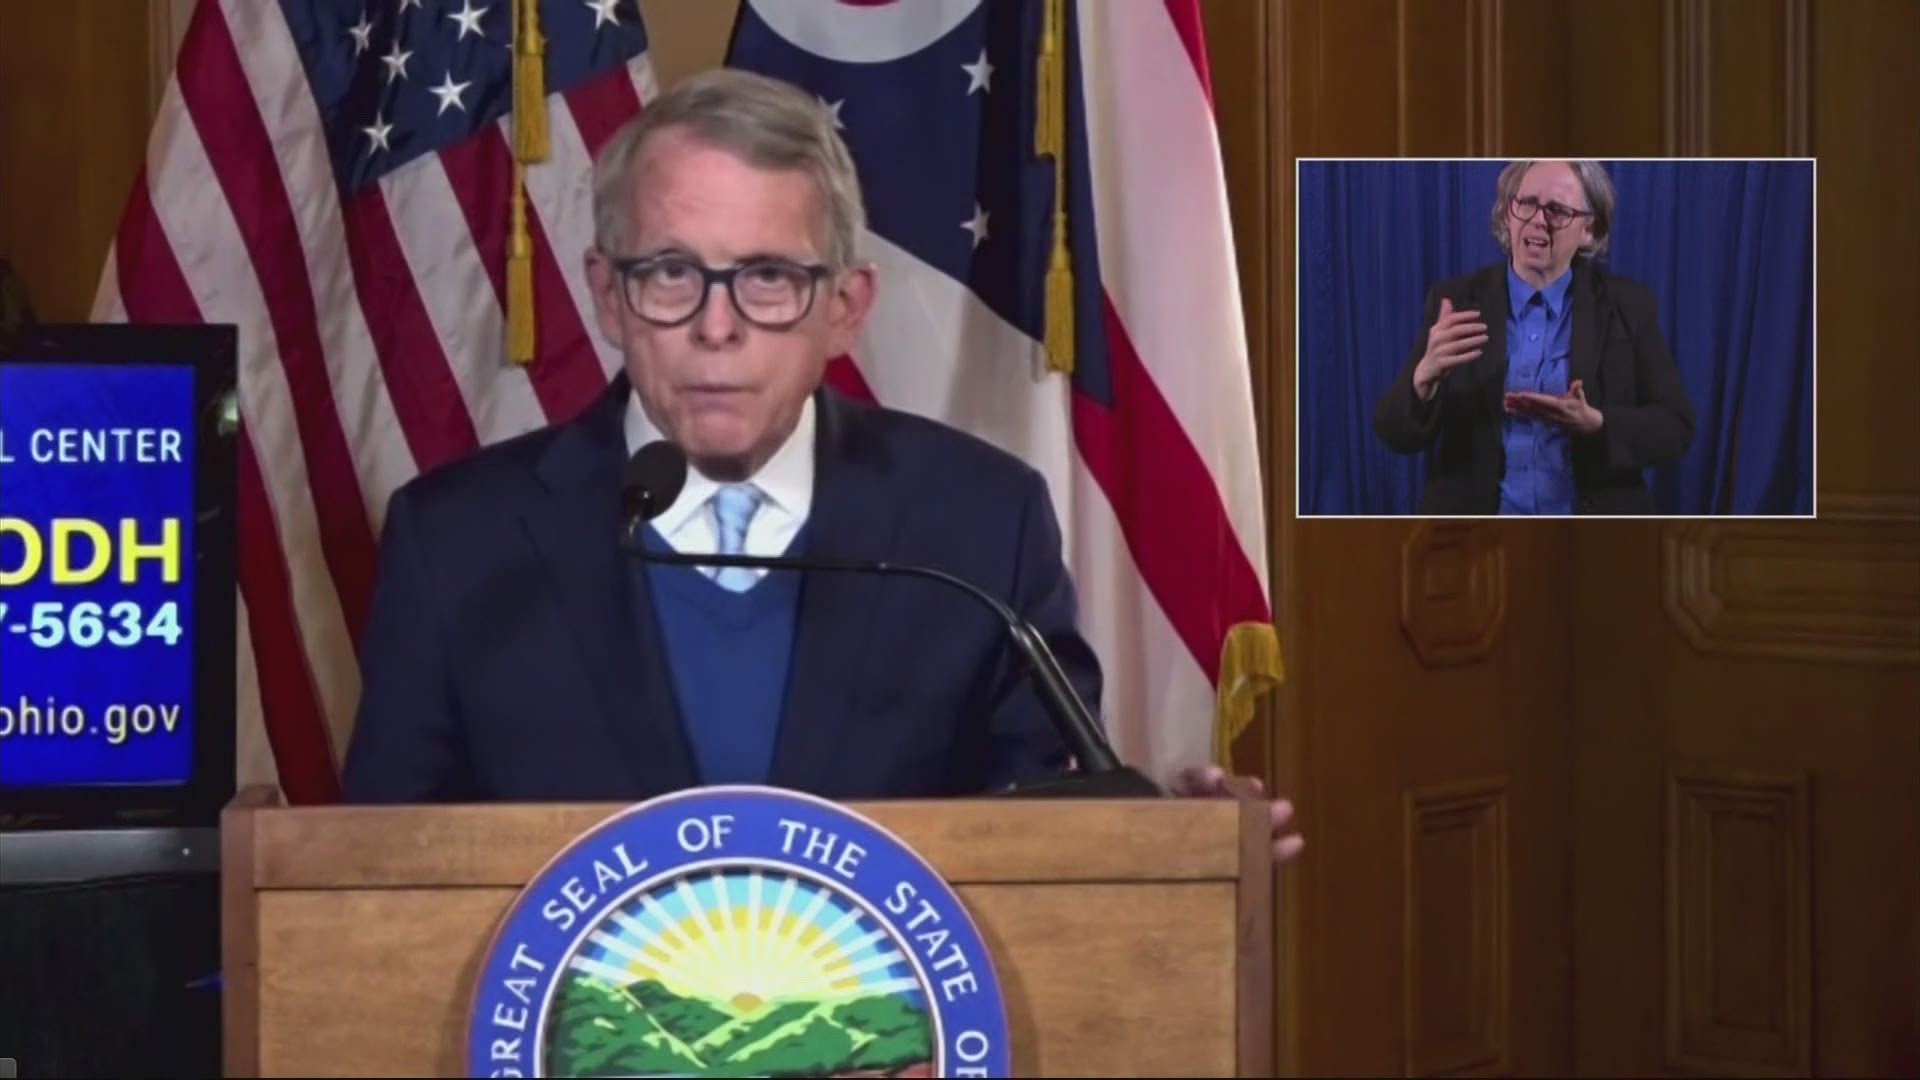 Gov. Mike DeWine urged the community to remain calm and not jump to conclusions.